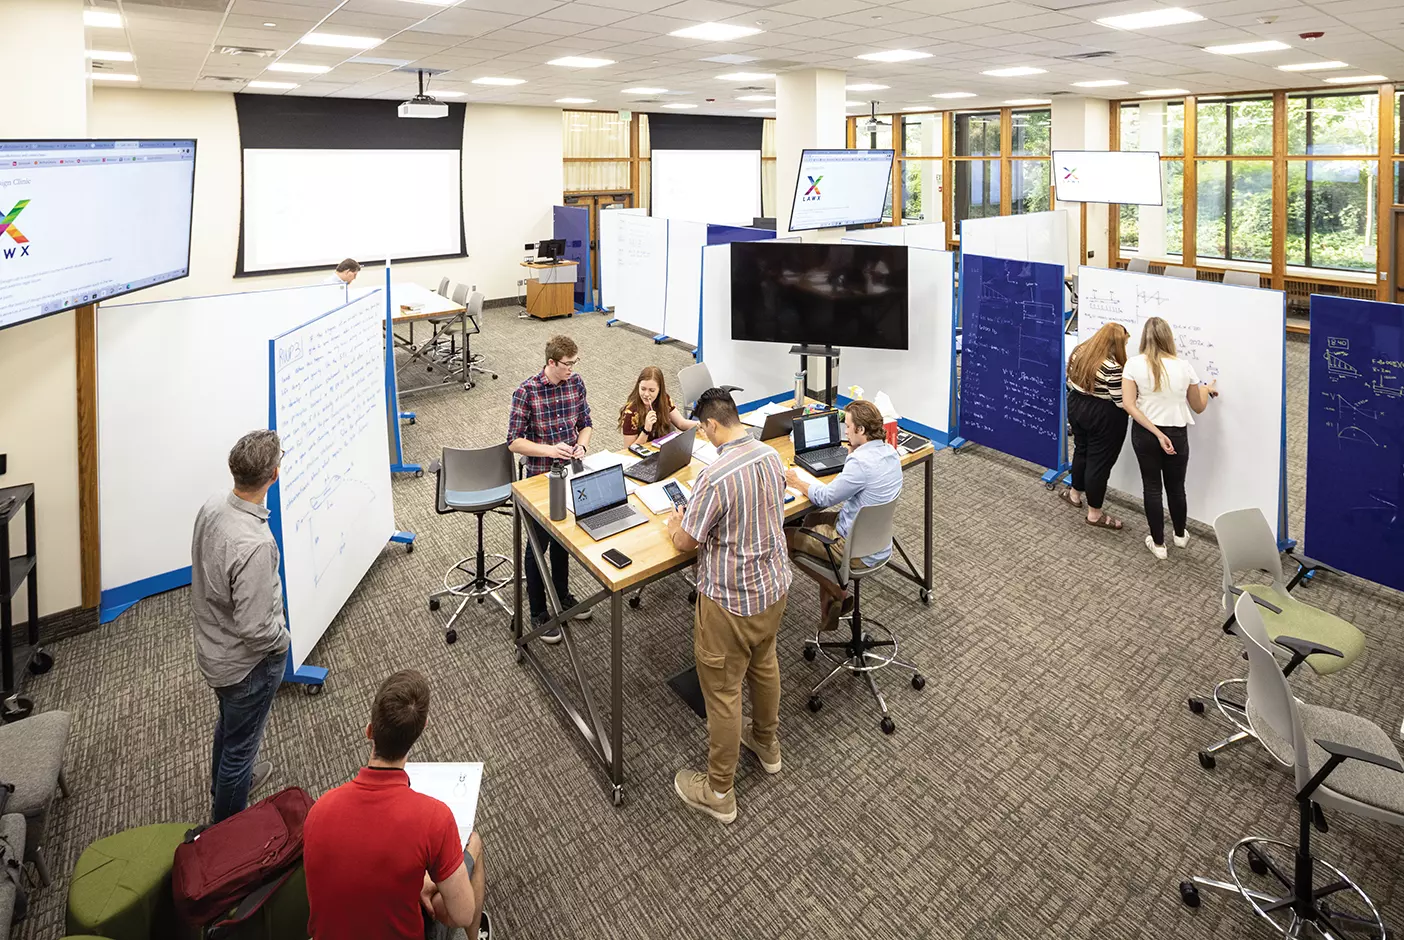 A group of BYU law students gather to solve problems with design-thinking and technology.